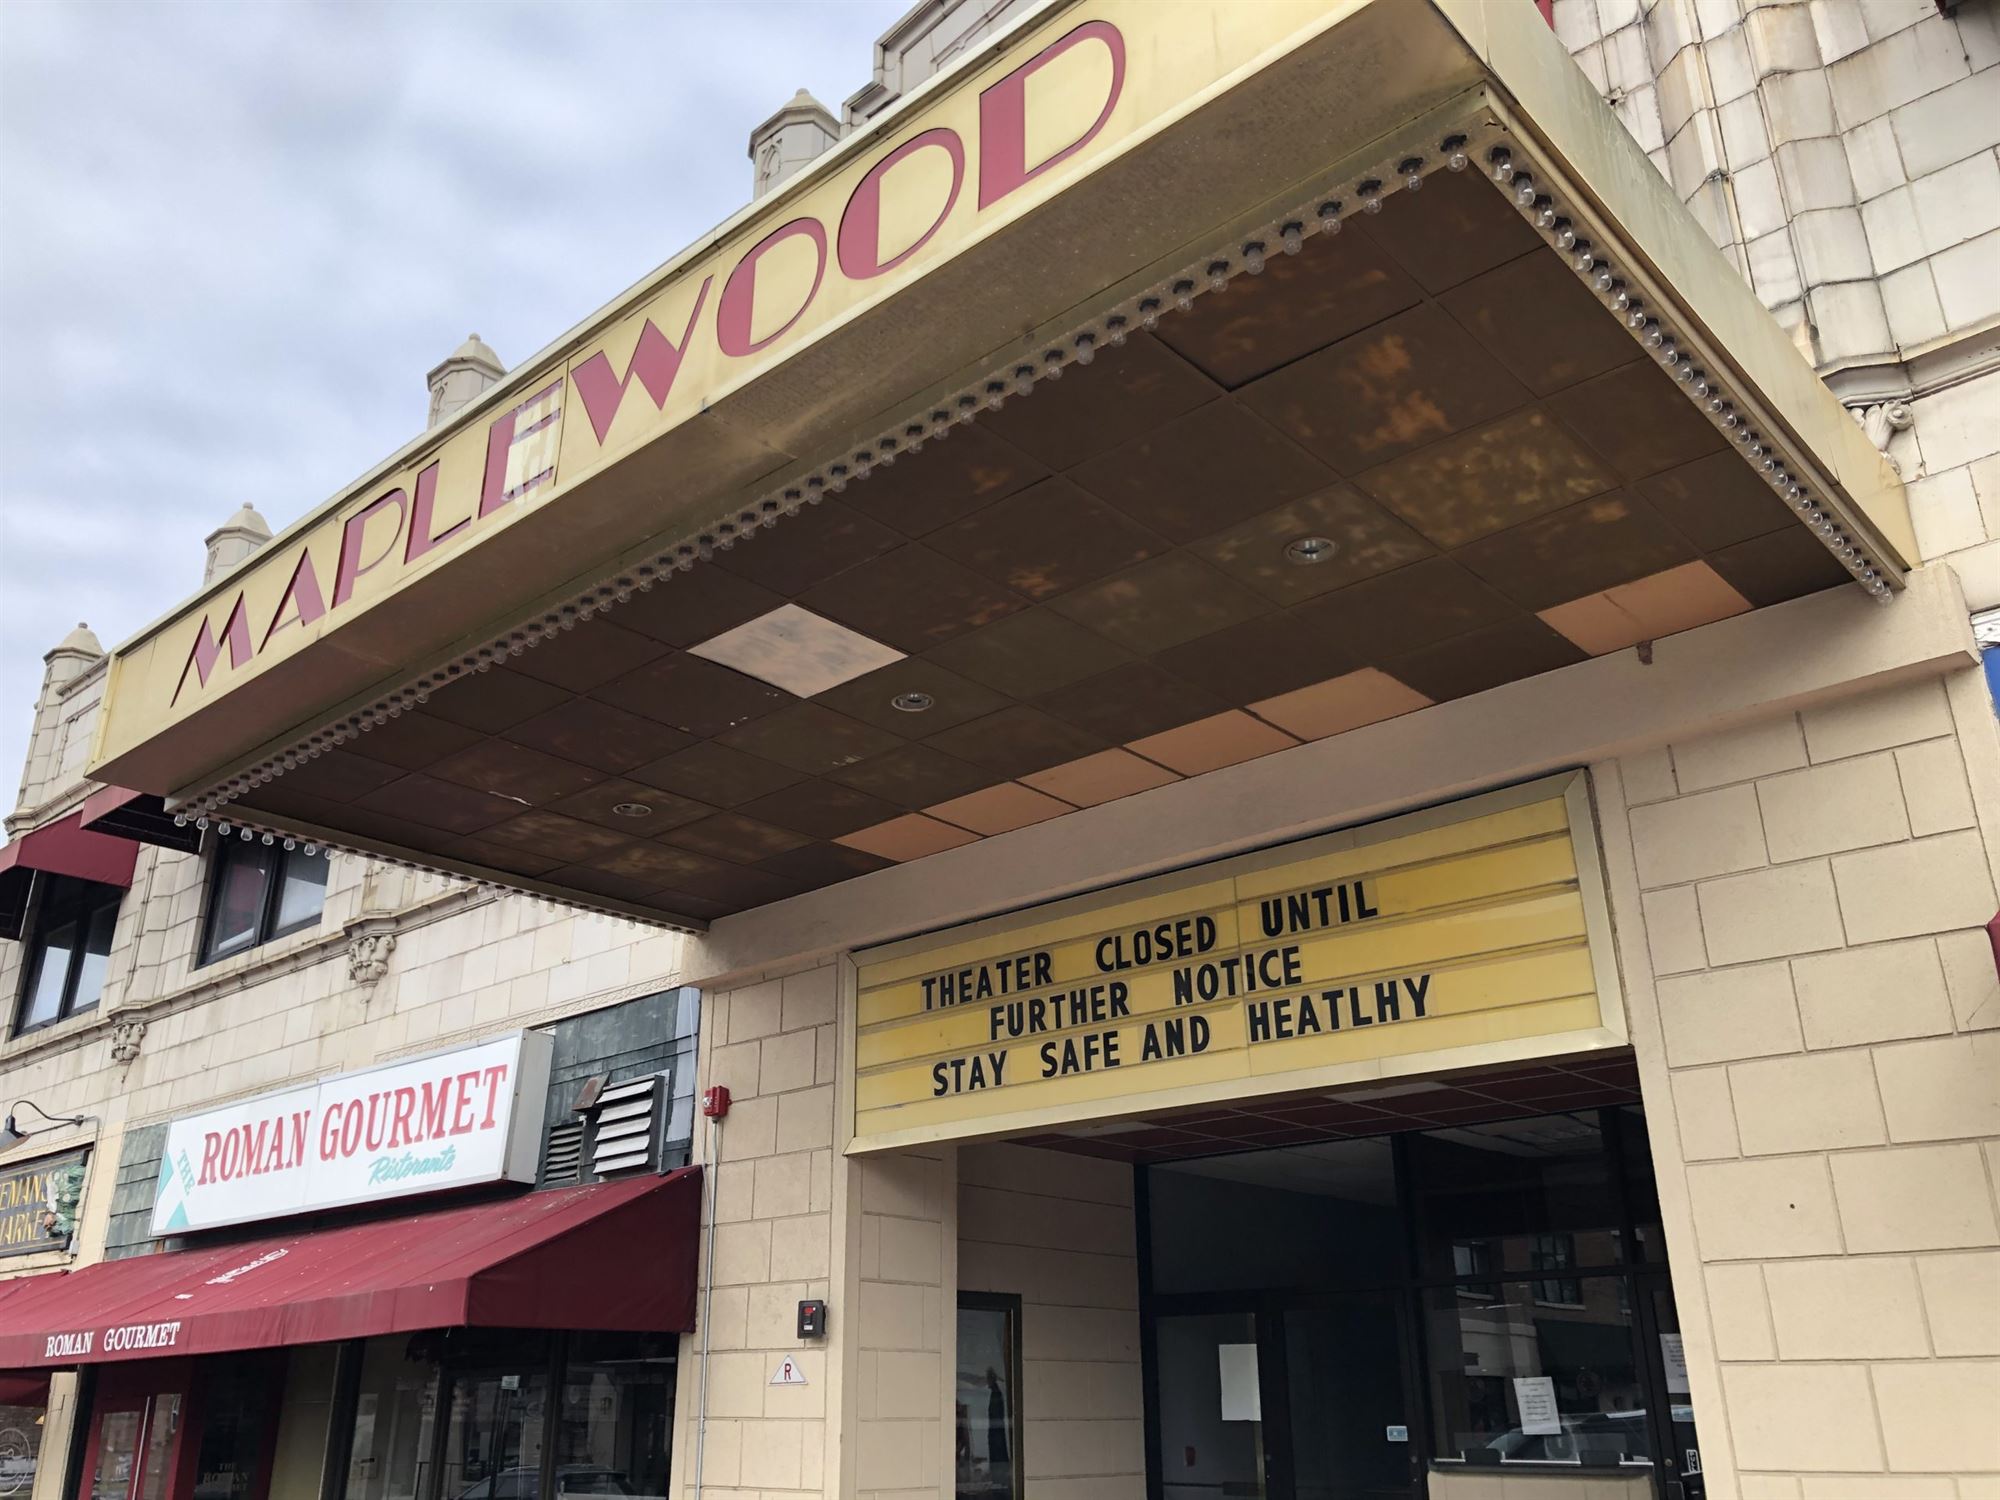 Movie Theater Leases End at South Orange Performing Arts Center